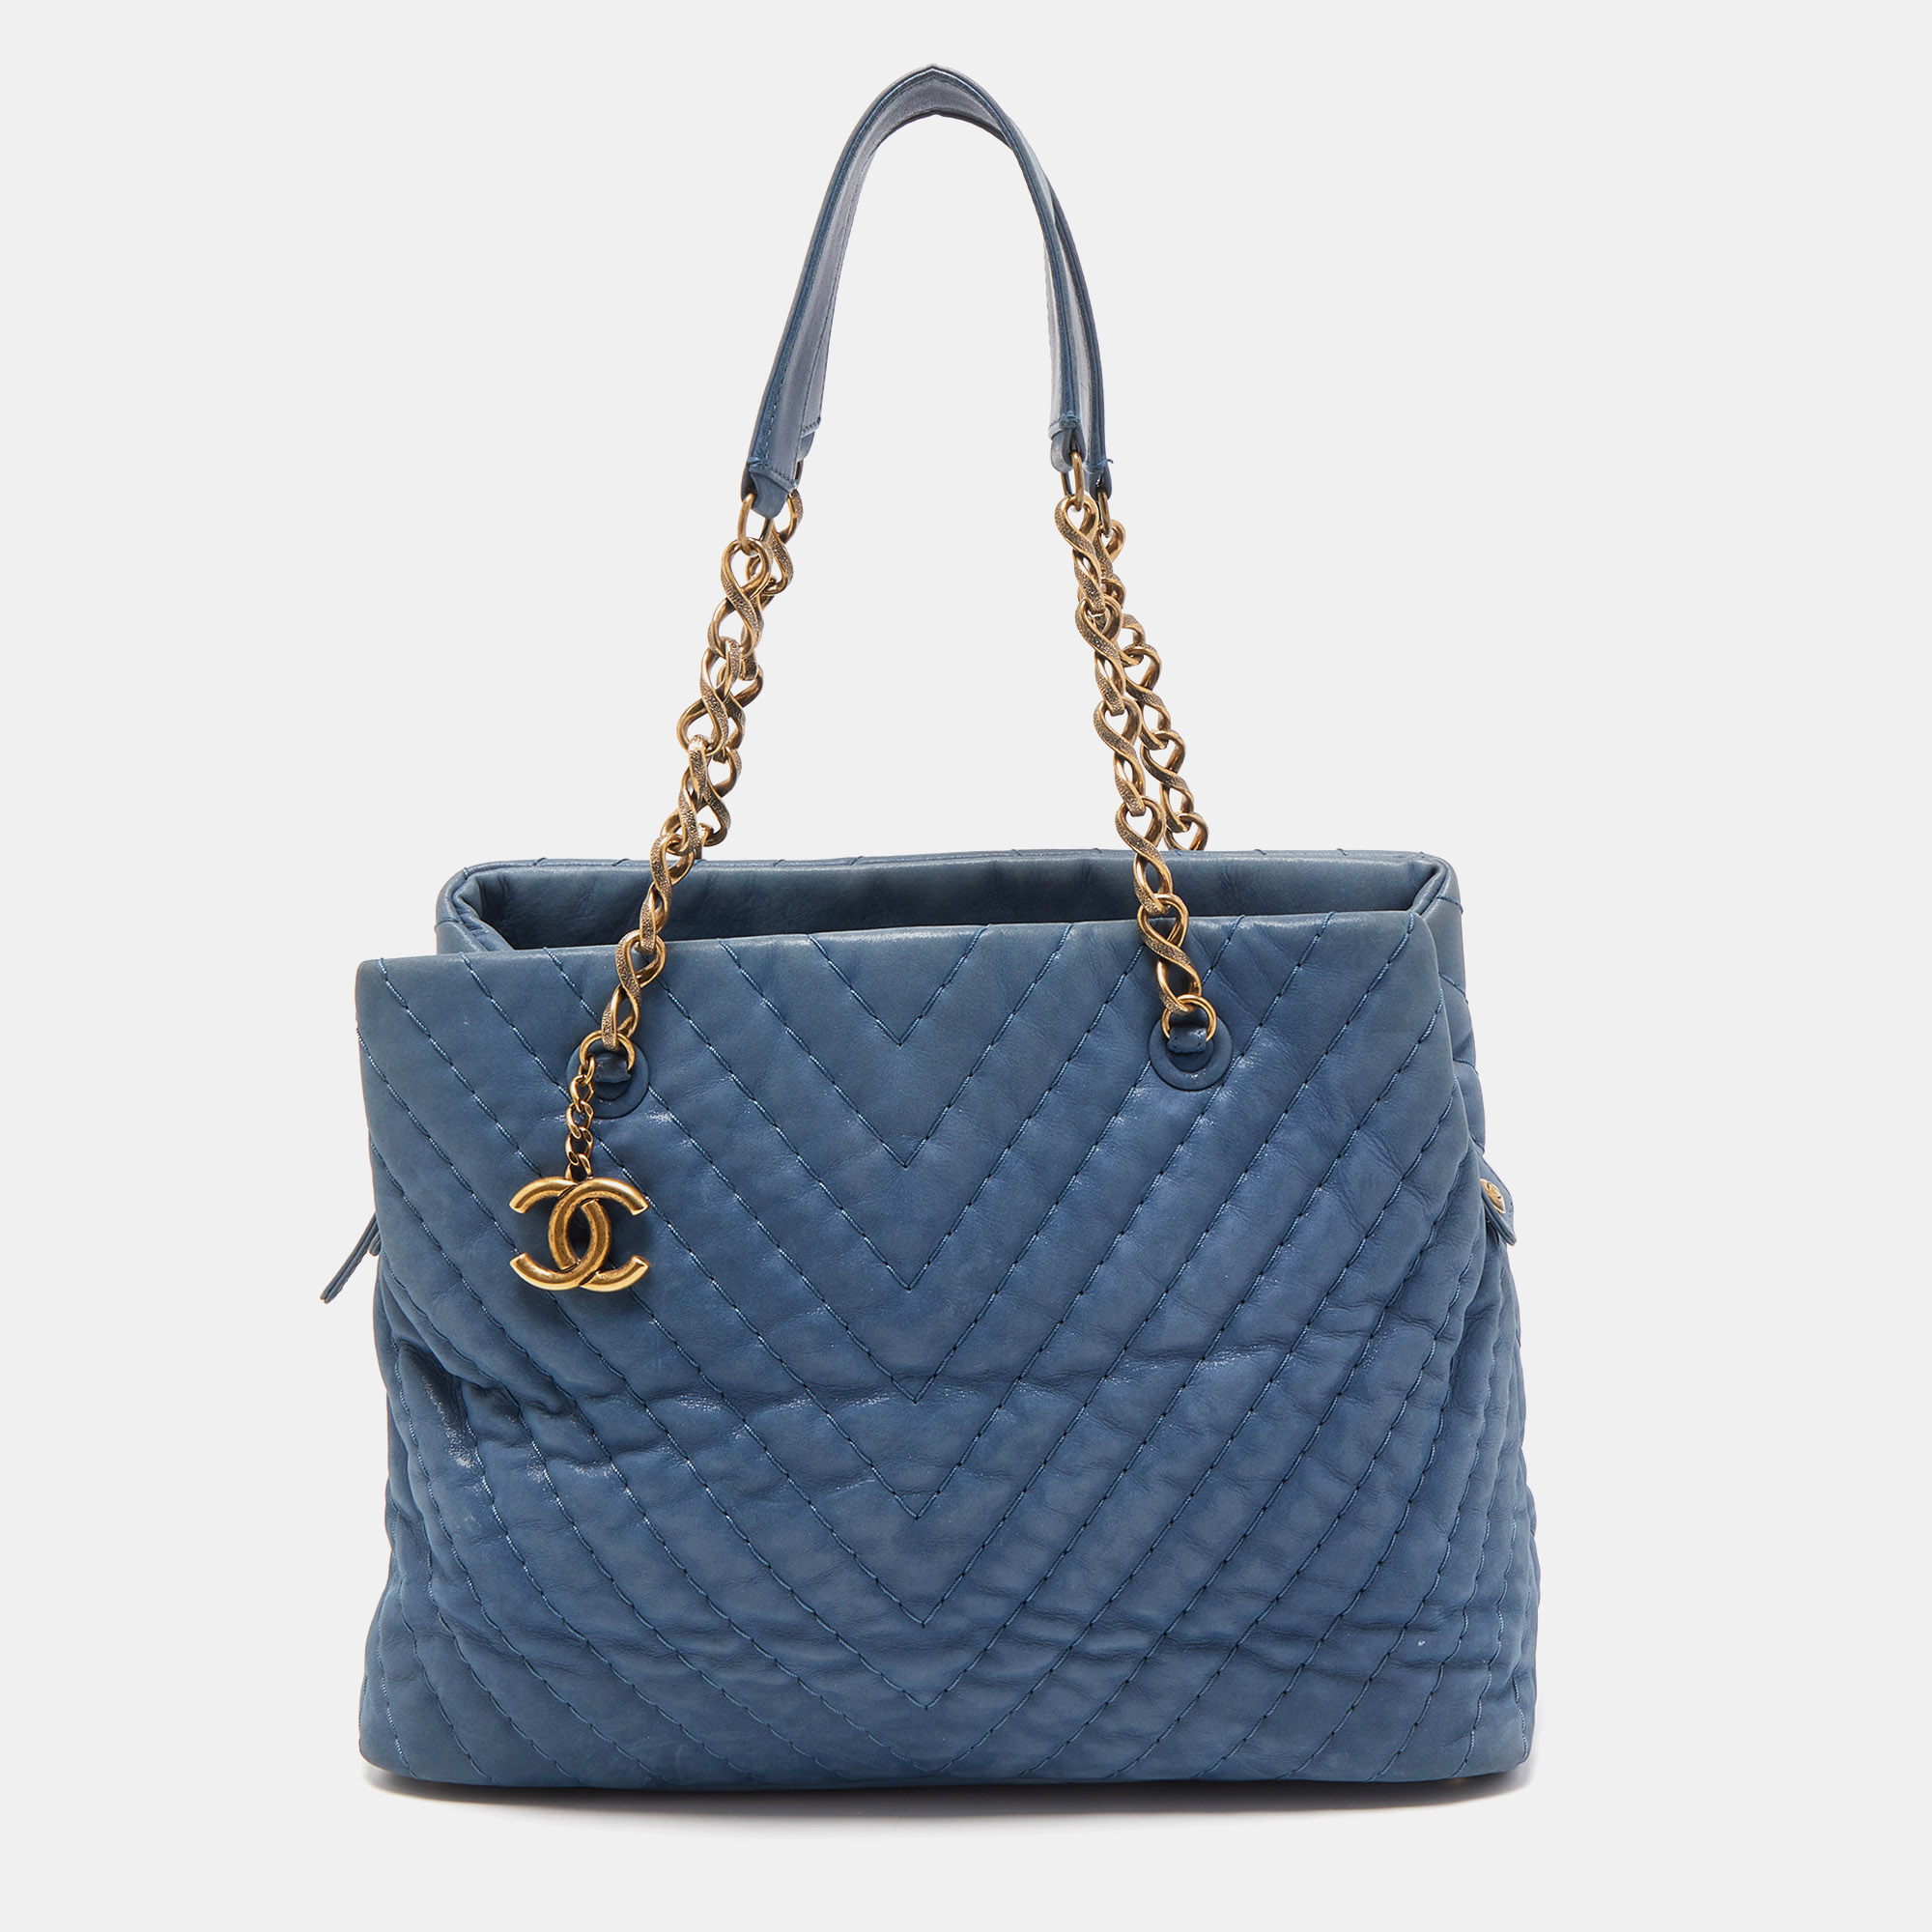 Pre-owned Chanel Blue Chevron Iridescent Leather Large Surpique Tote